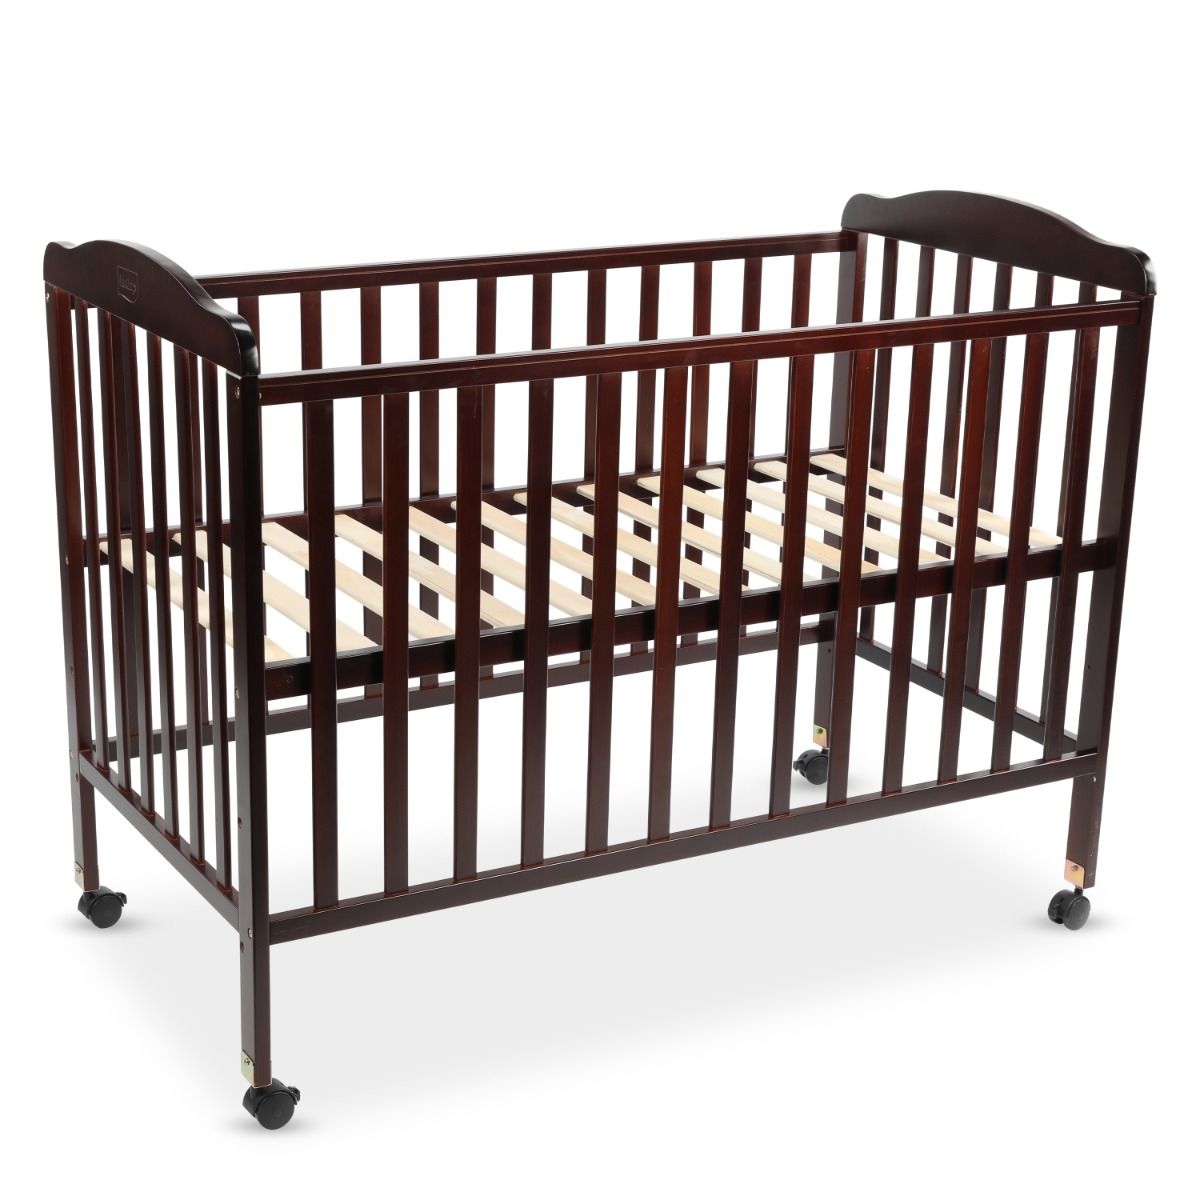 LuvLap C-60 Baby Wooden Cot with Mosquito Net